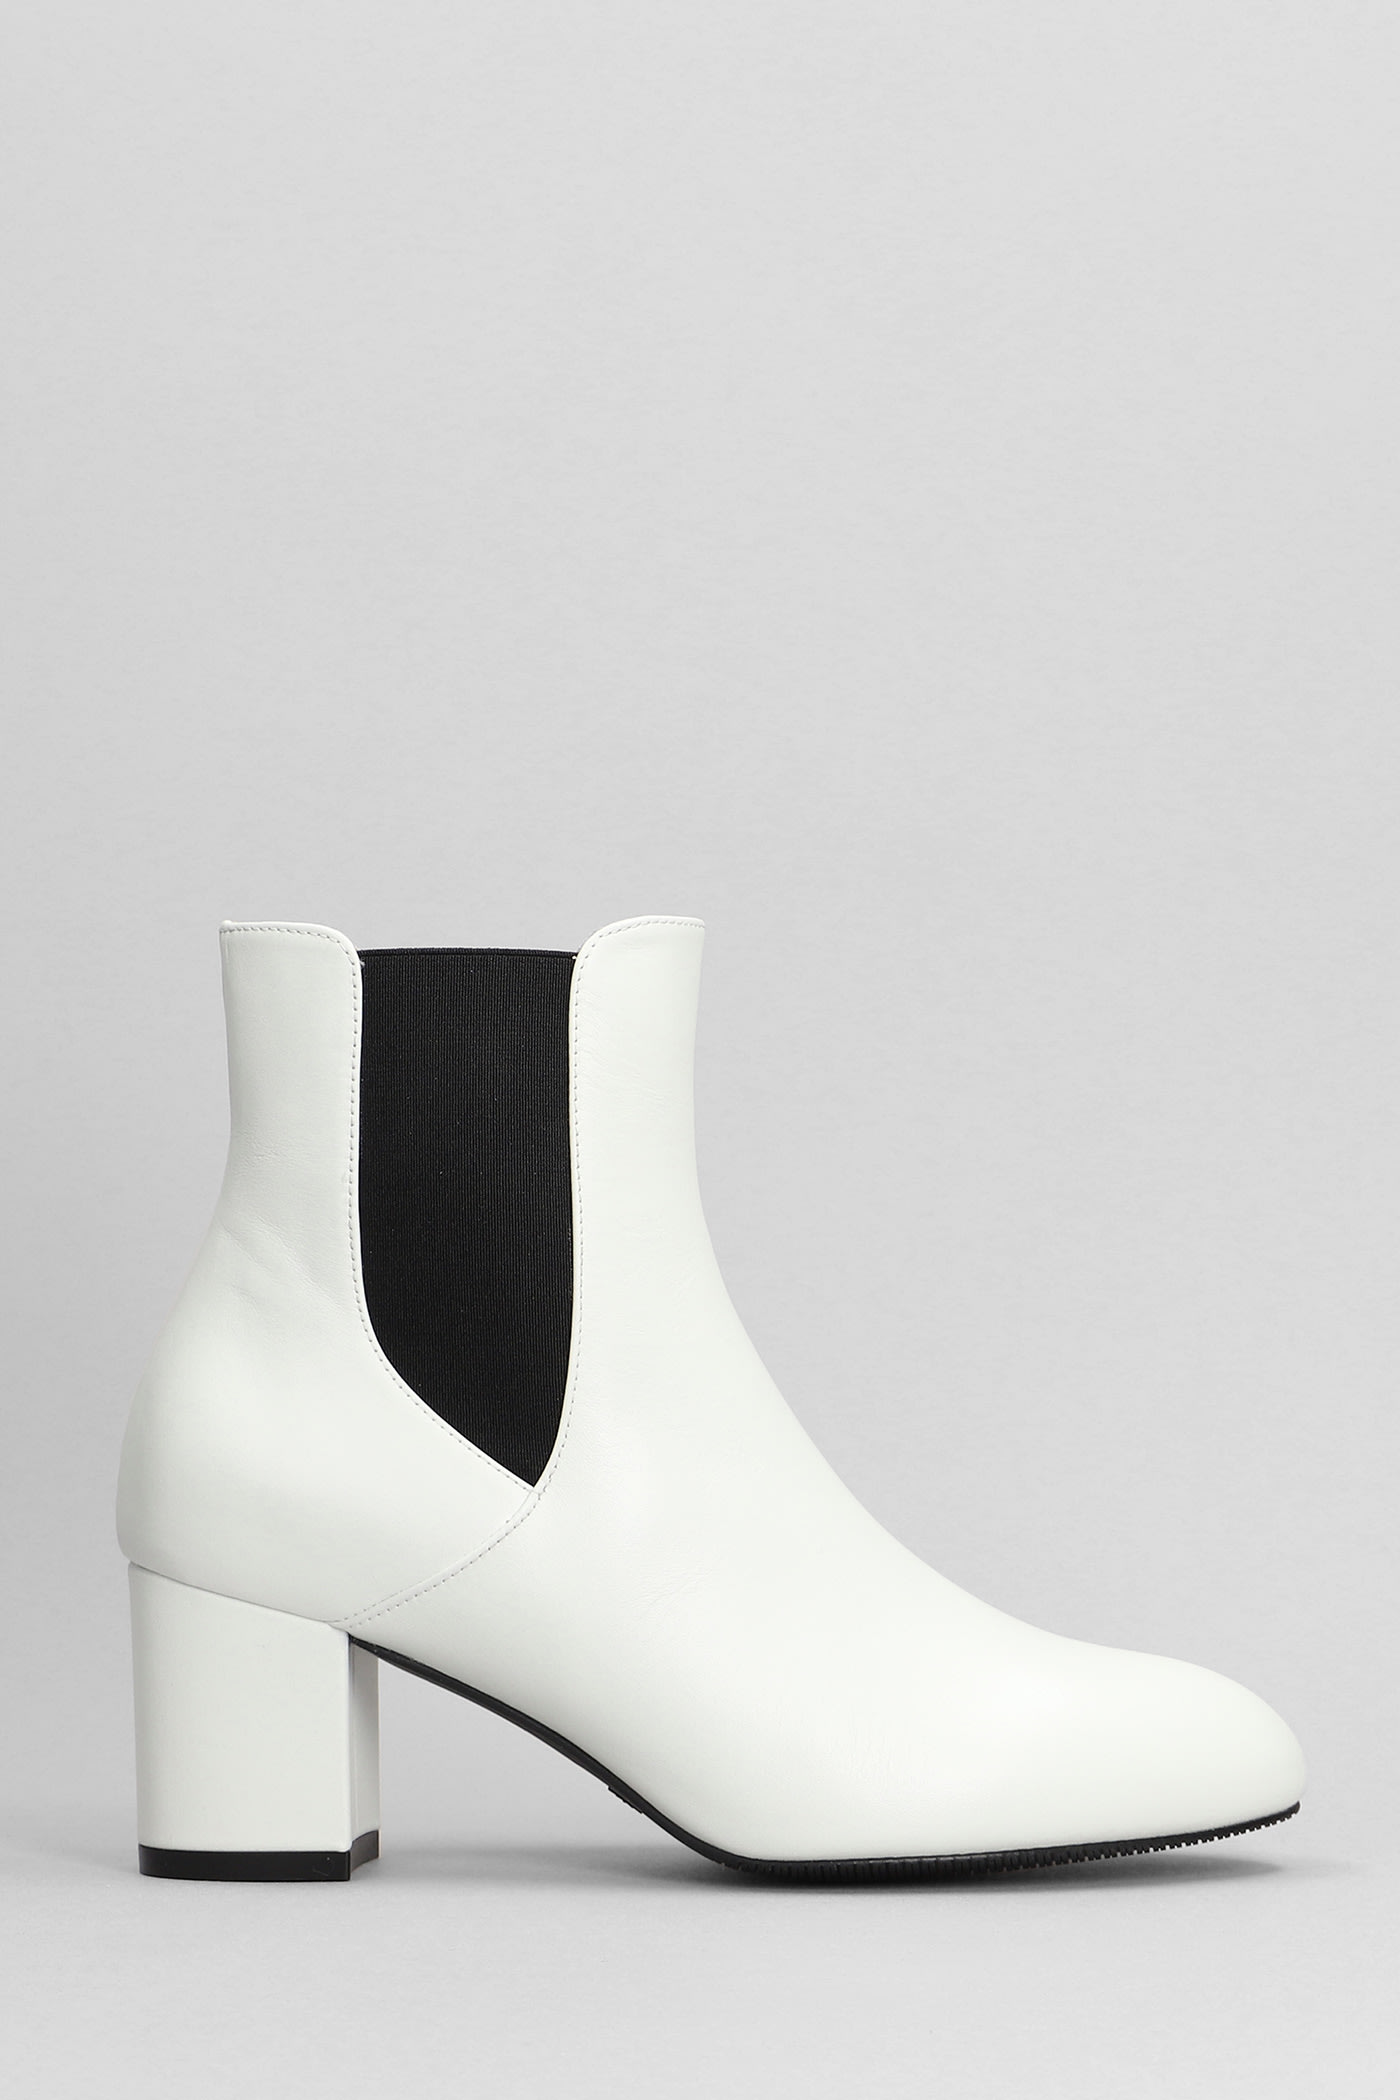 STUART WEITZMAN YULIANA 60 ANKLE BOOTS IN WHITE LEATHER